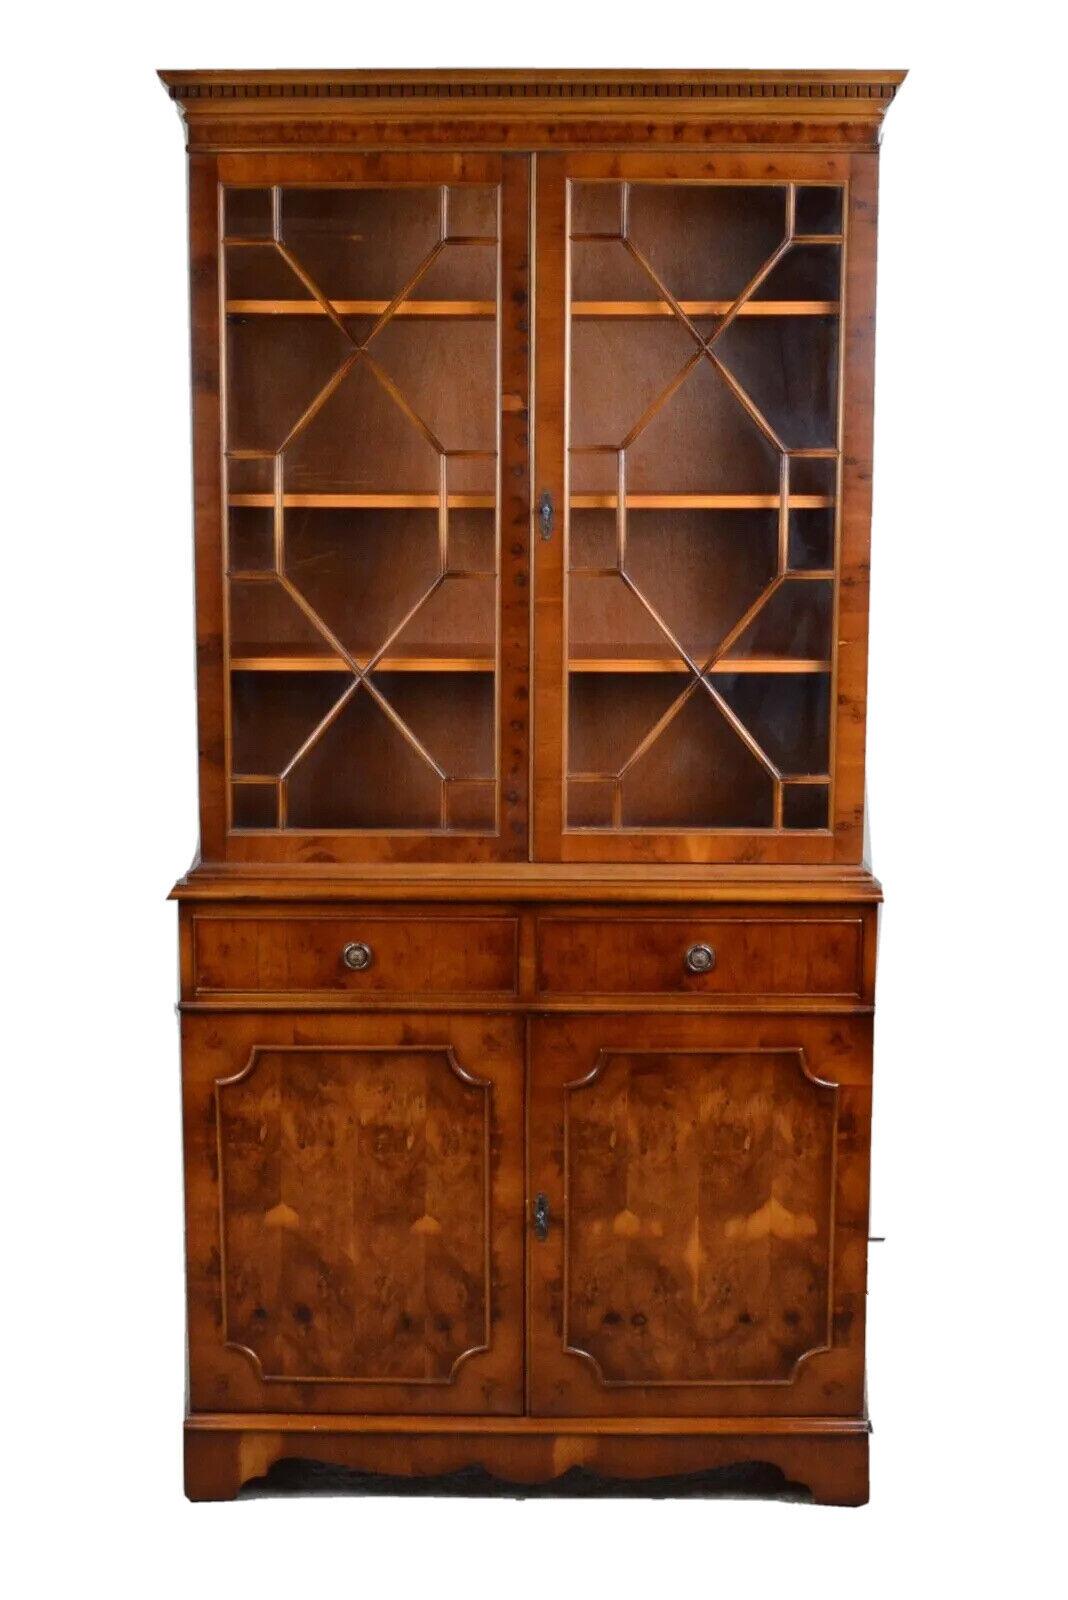 Bevan Funnell Astral Glazed Hardwood Library Display Bookcase Regency Style For Sale 7